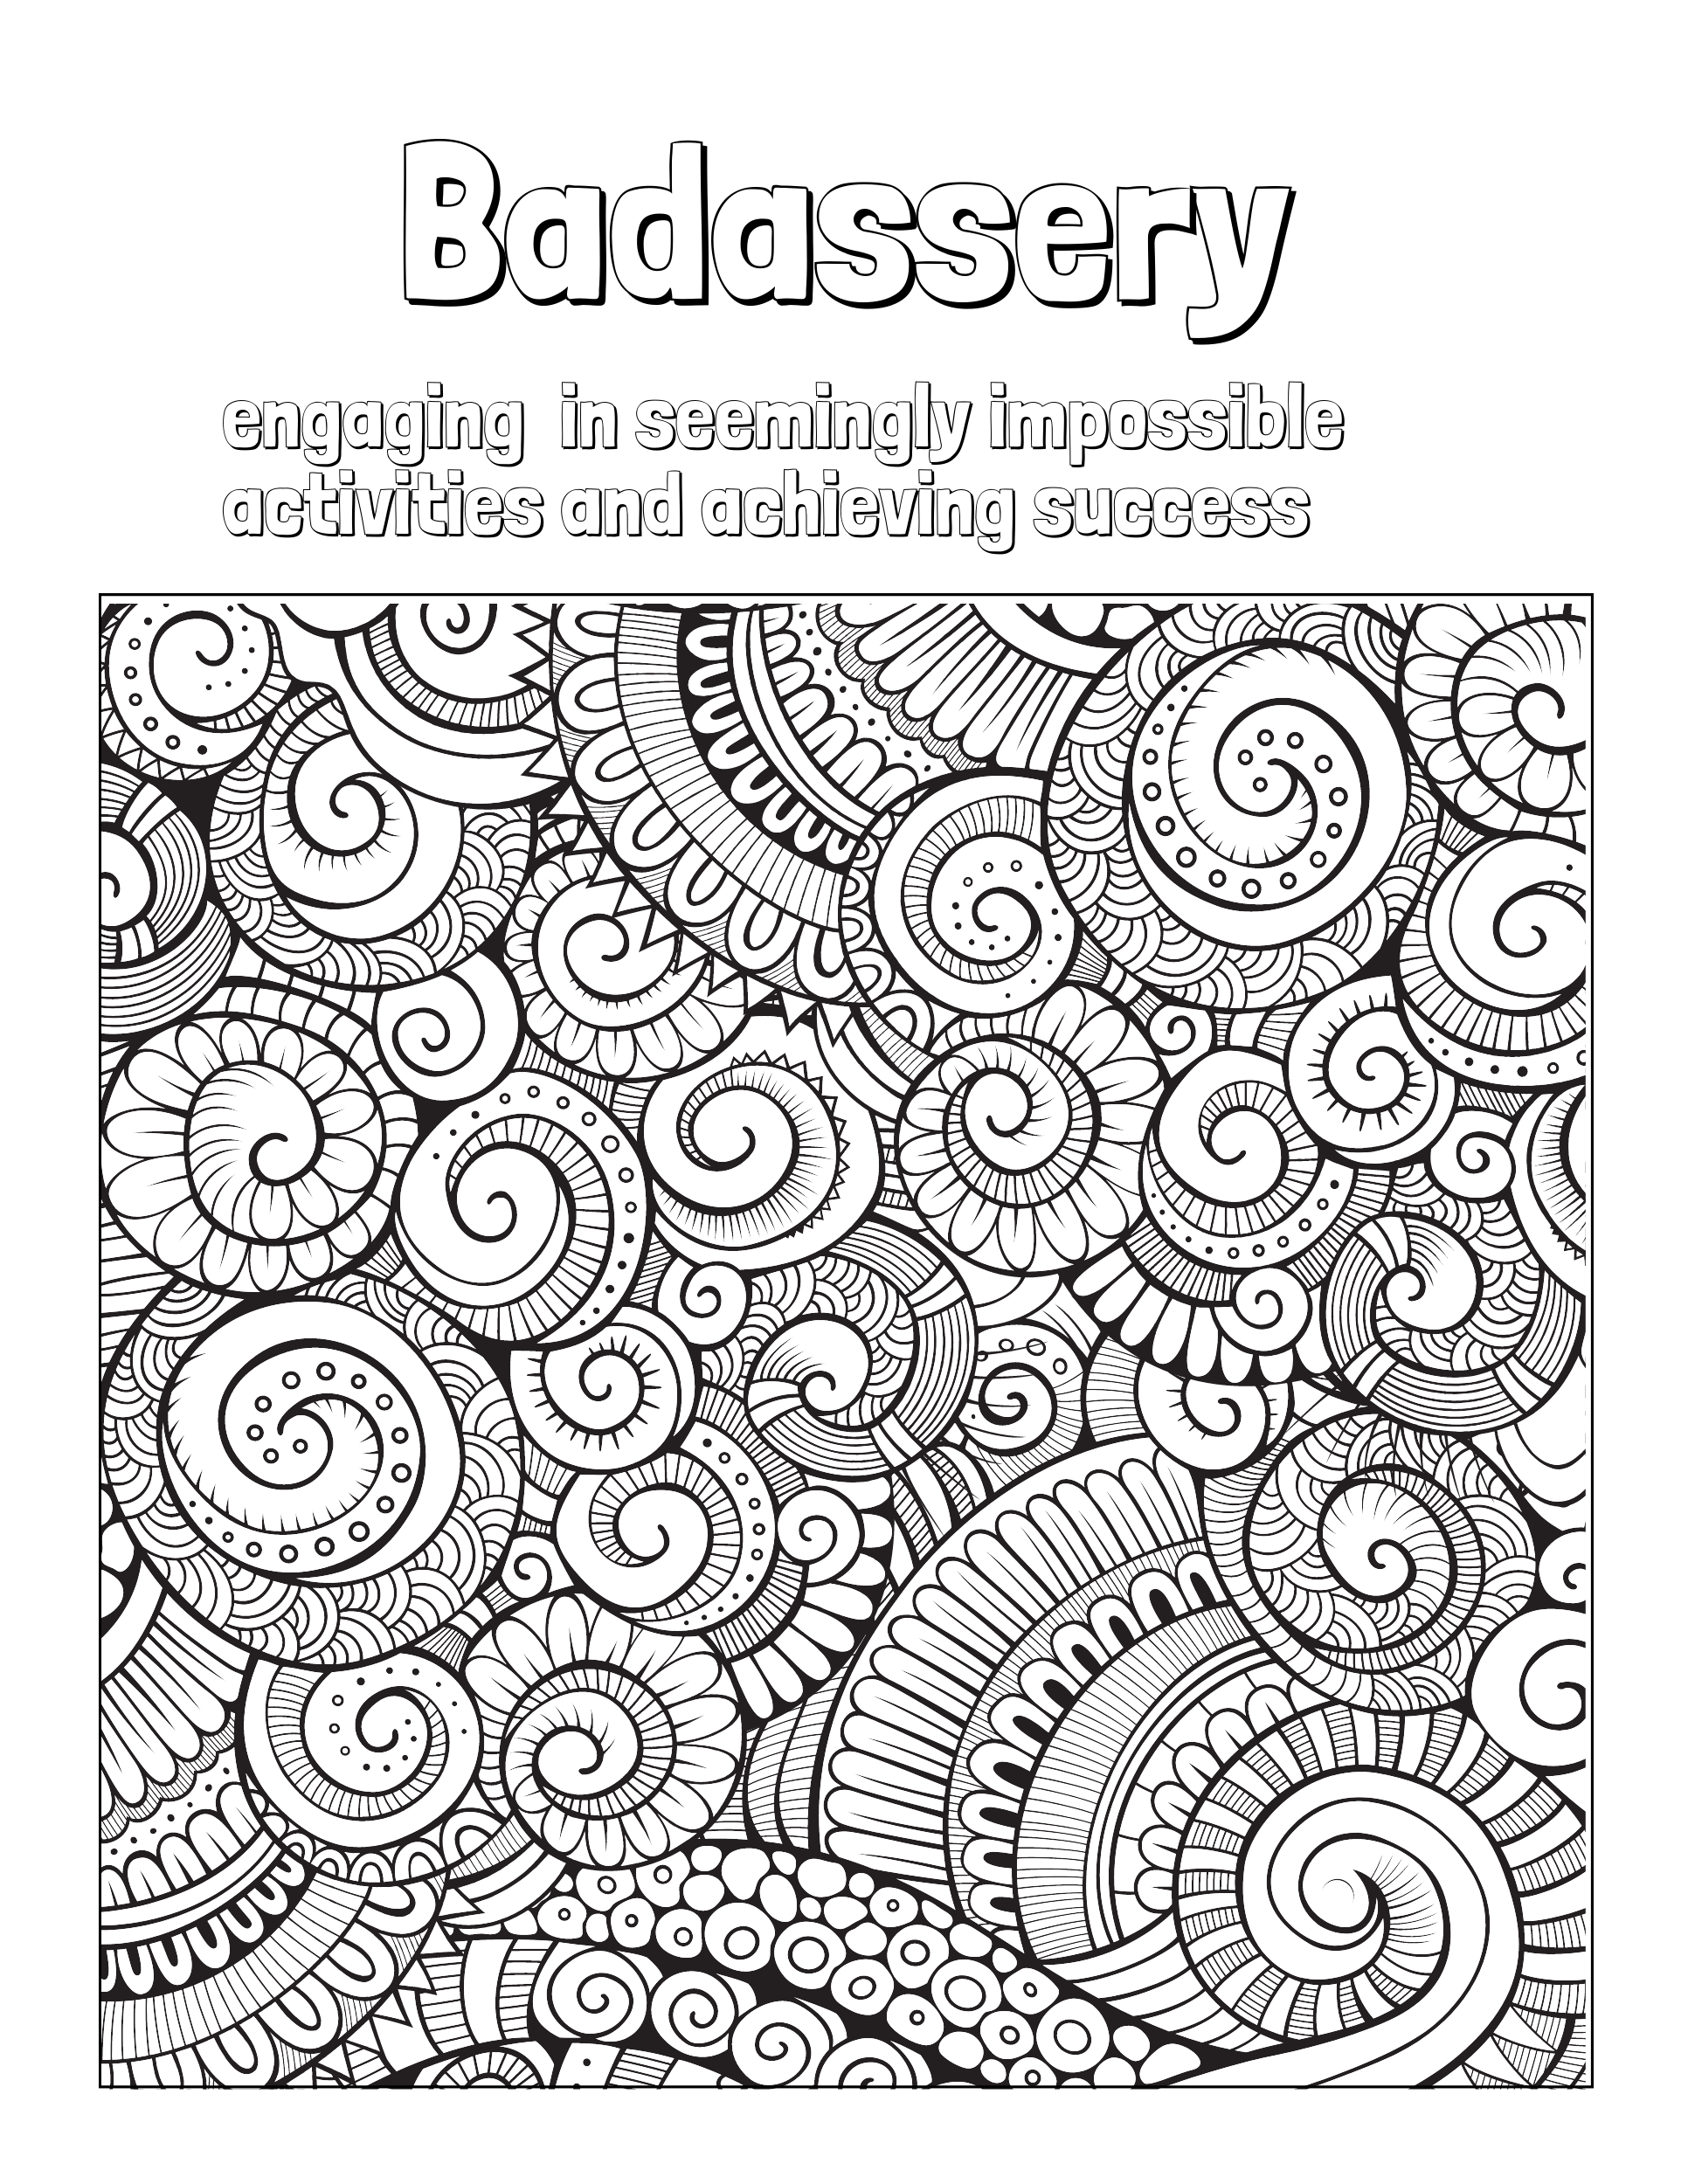 Fuck This I'm Coloring: Motivational Swear Words Coloring Book: Swear Word Colouring Books for Adults: Swearing Colouring Book Pages for Stress Relief and Relaxation  Adult Coloring Book Cuss Words [Book]